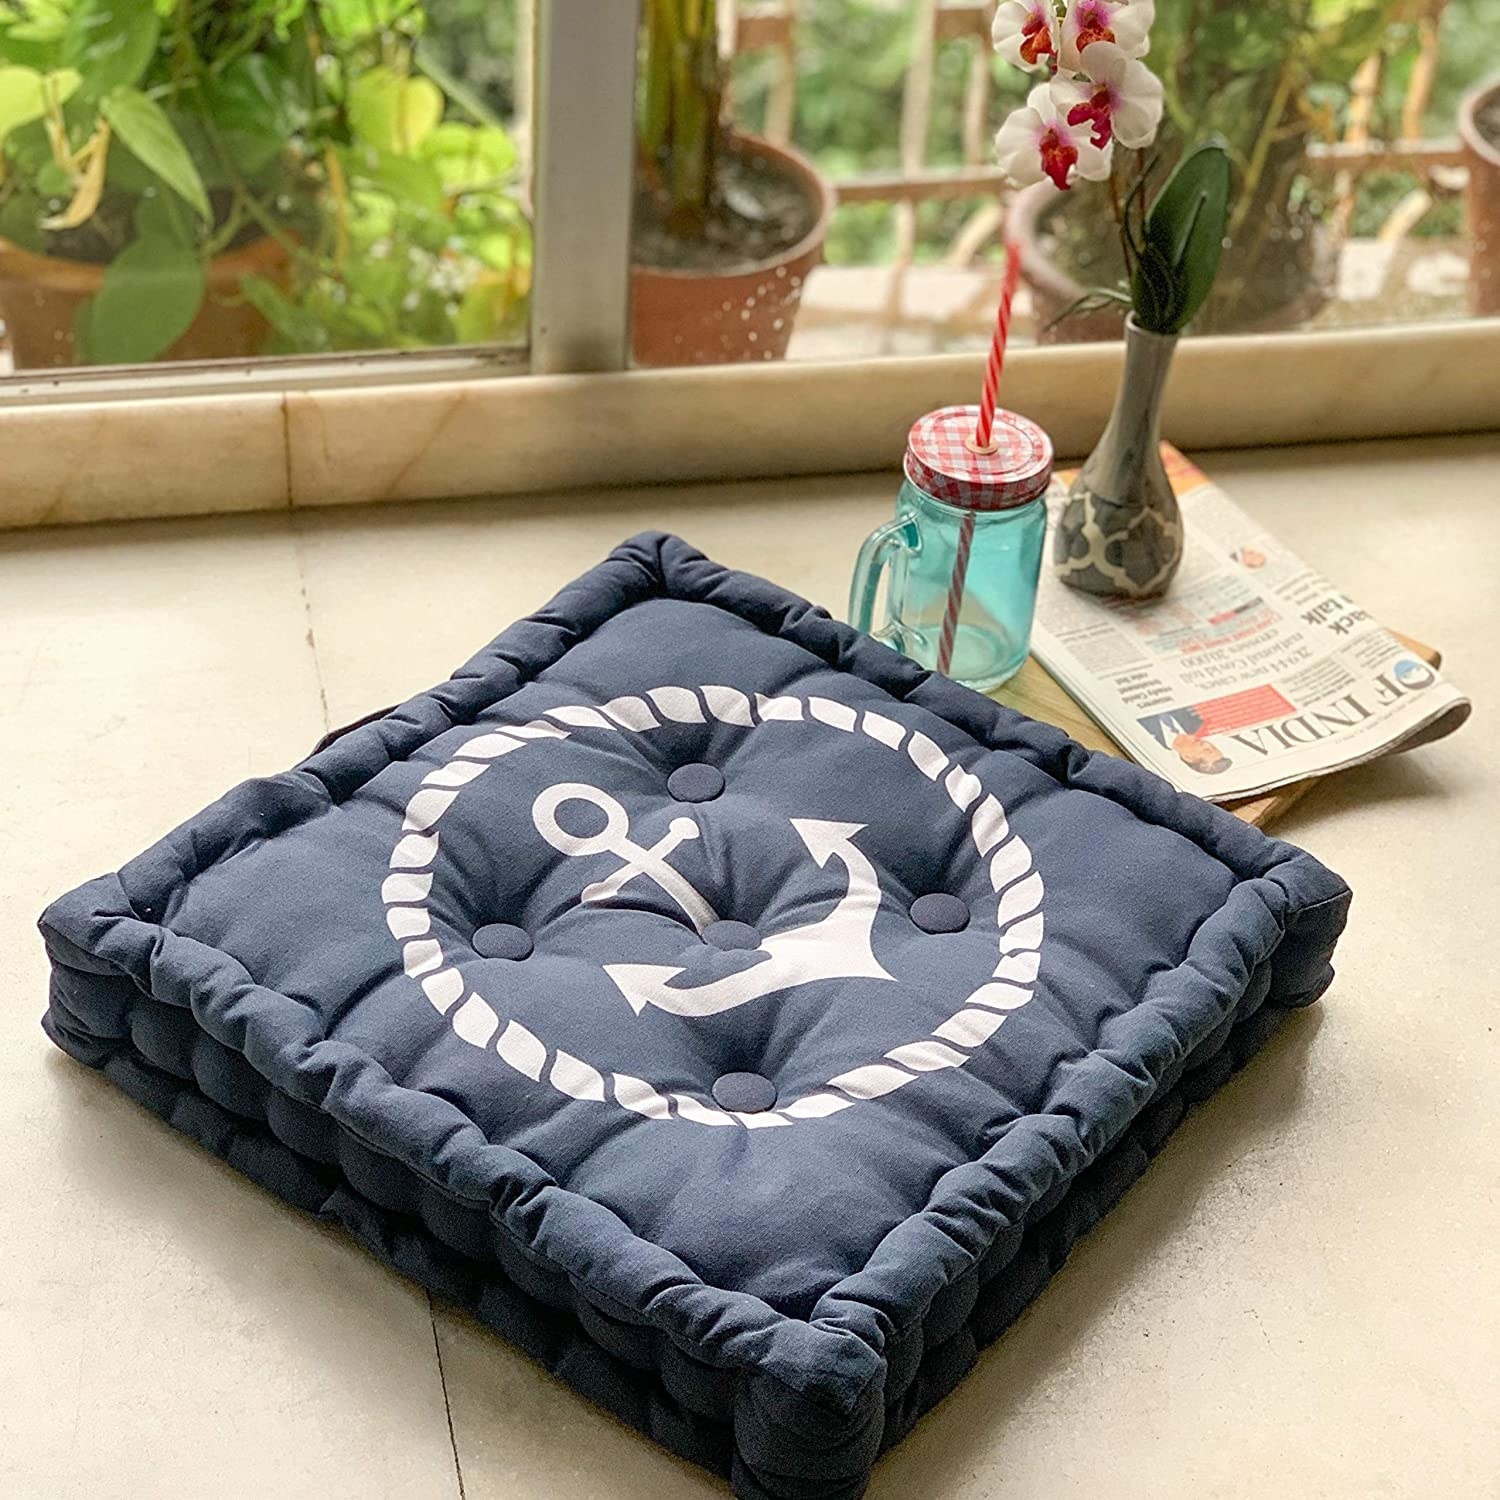 A navy blue square cushion with an anchor printed on it. It&#x27;s kept next to newspapers, a vase of flowers, and a blue mason jar.